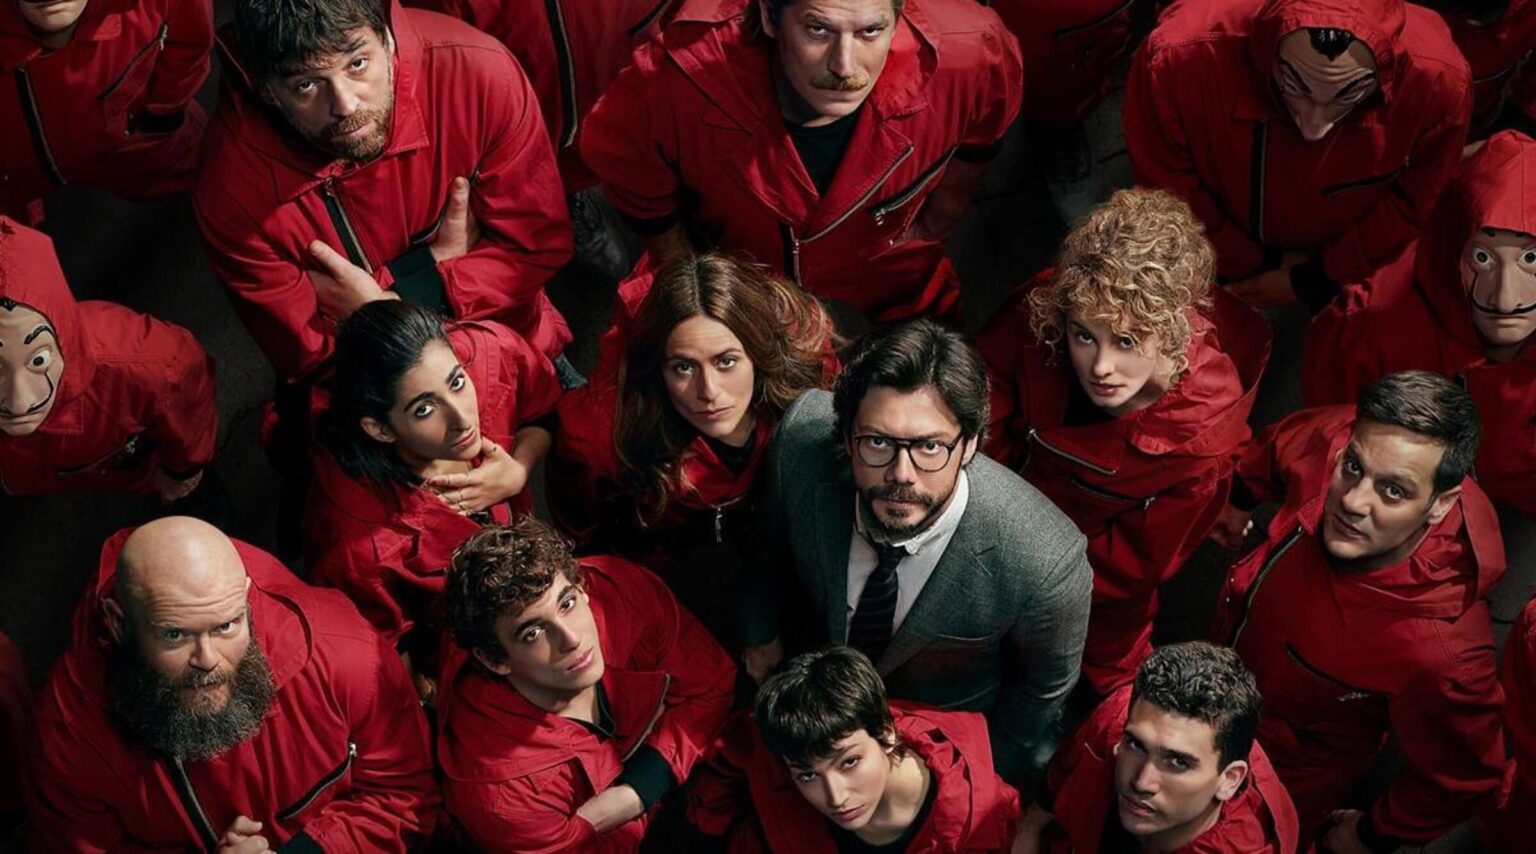 Fans are nothing but eager to binge this show. What do you think Alicia Sierra has next in store for 'Money Heist' part 5? Here's what we think!